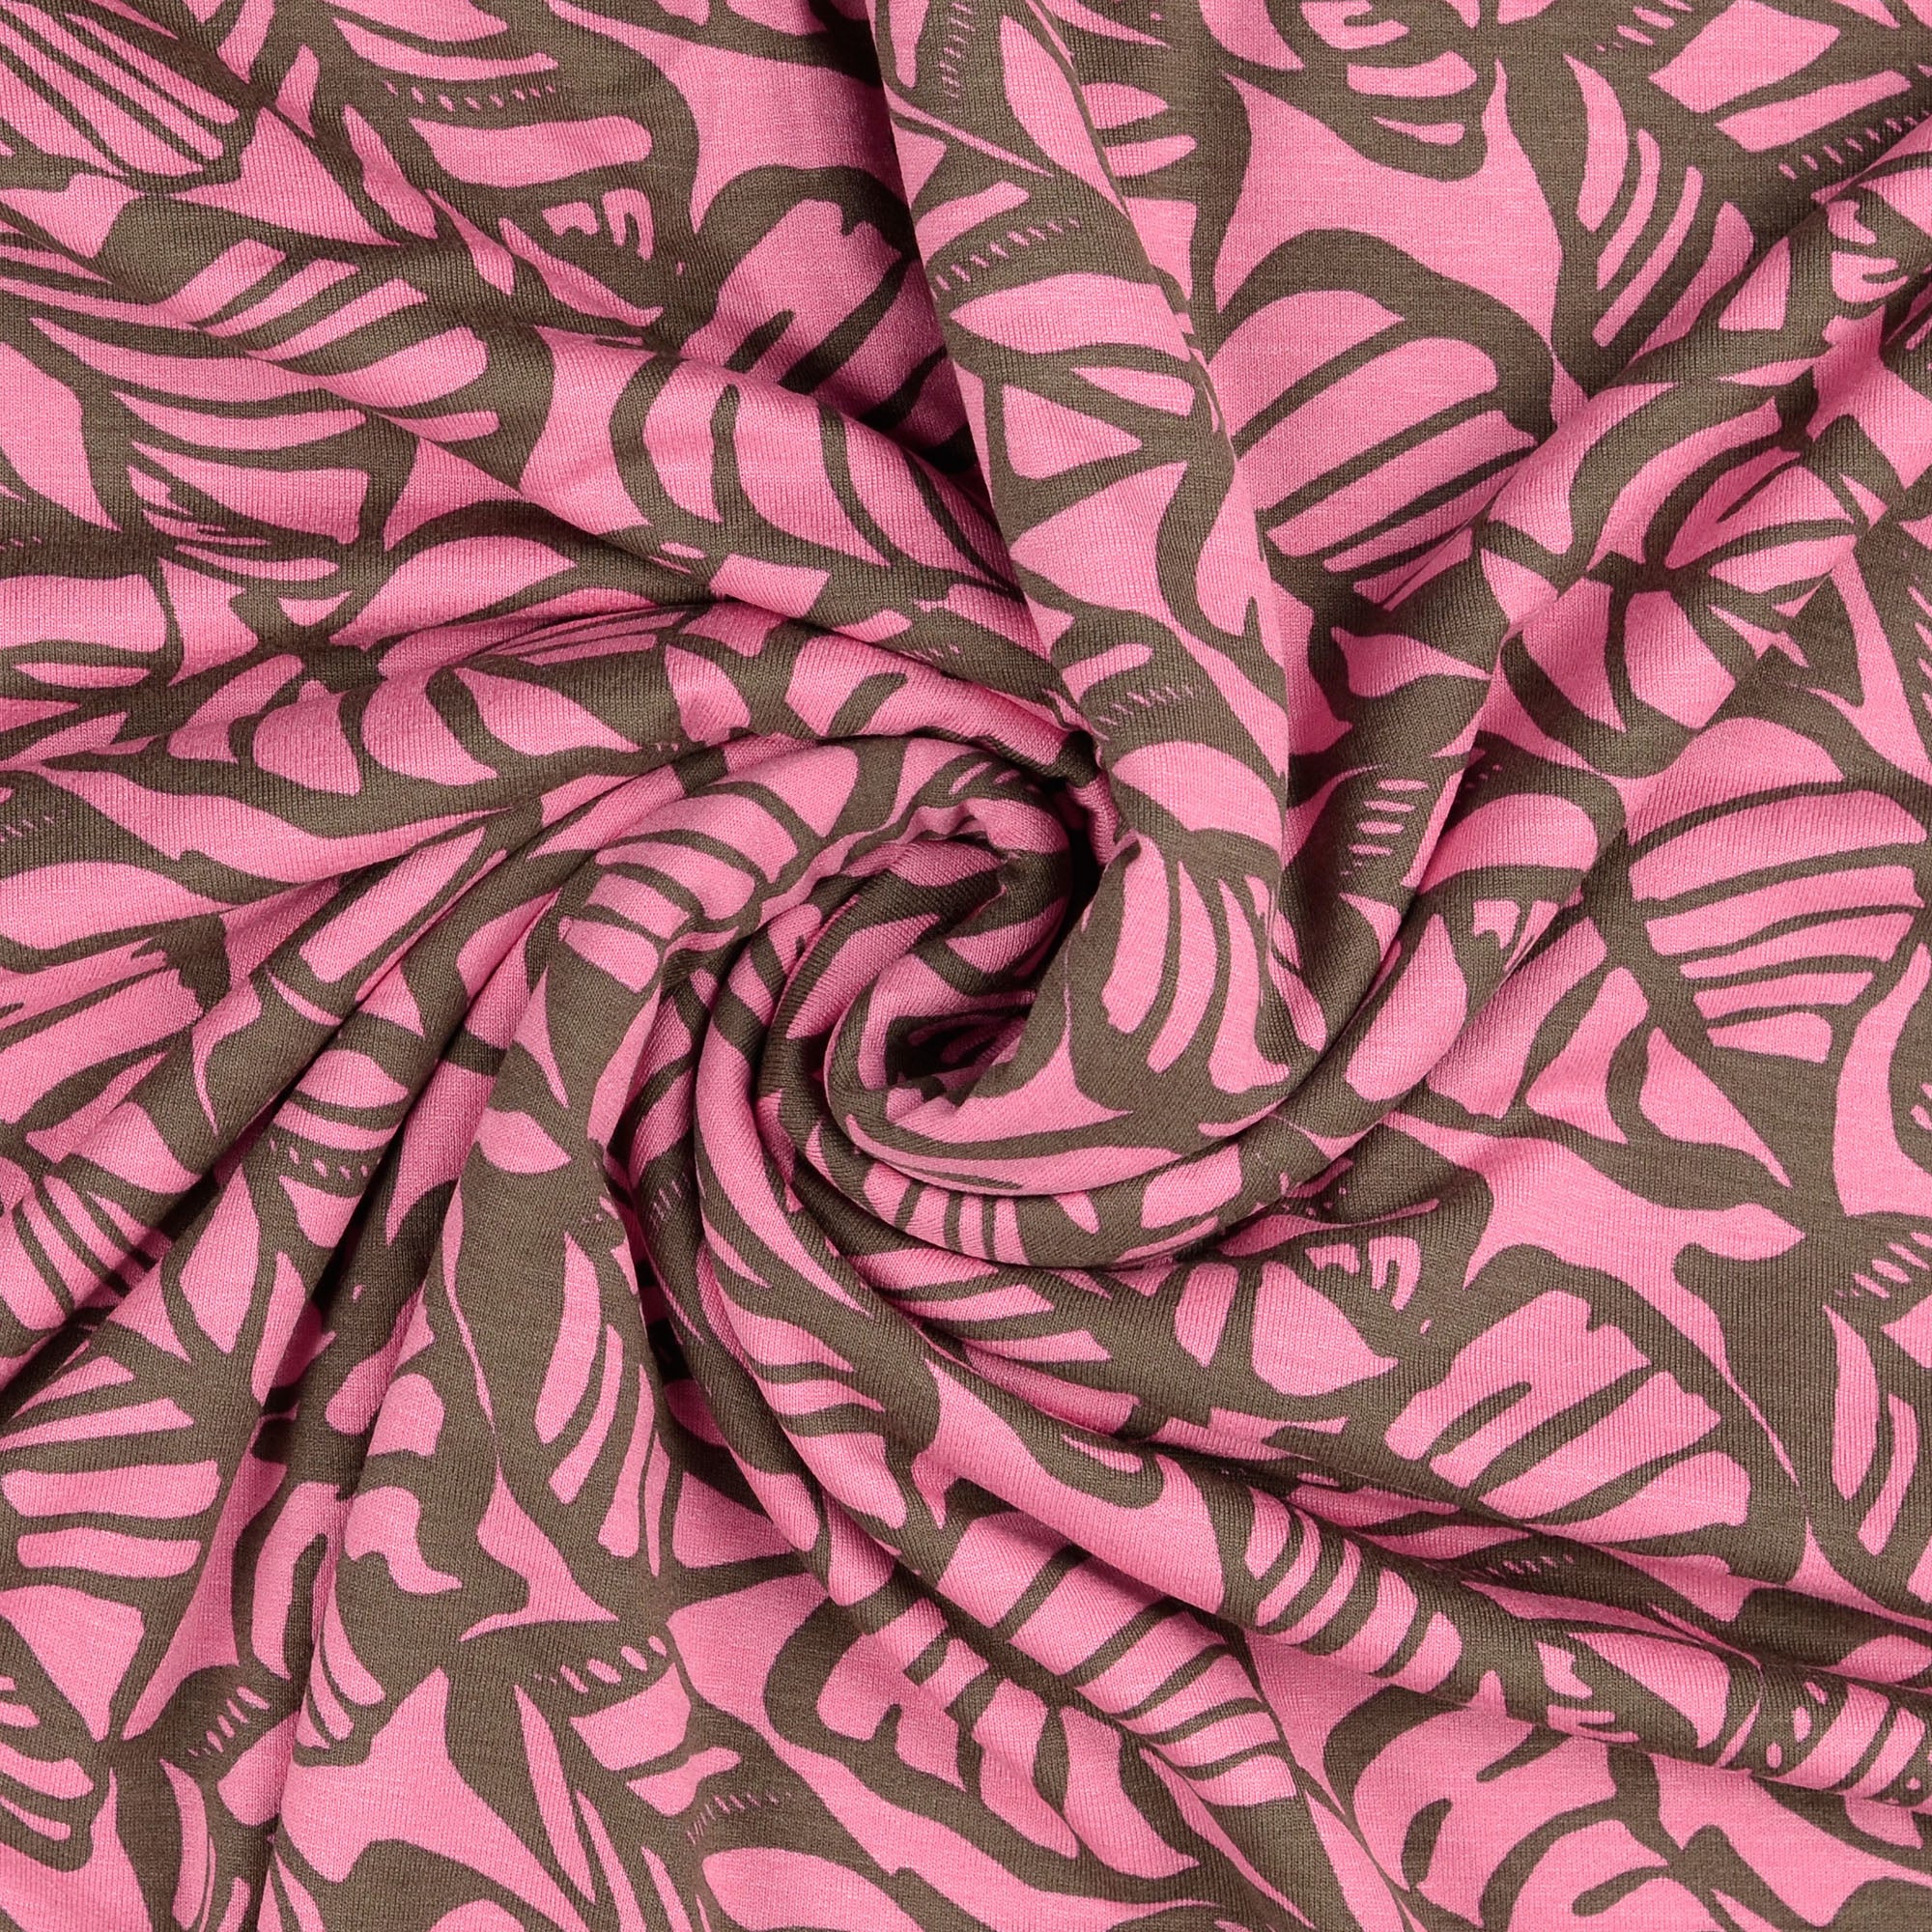 REMNANT 2.73 Metres - Graphic Leaves Pink Viscose Jersey Fabric